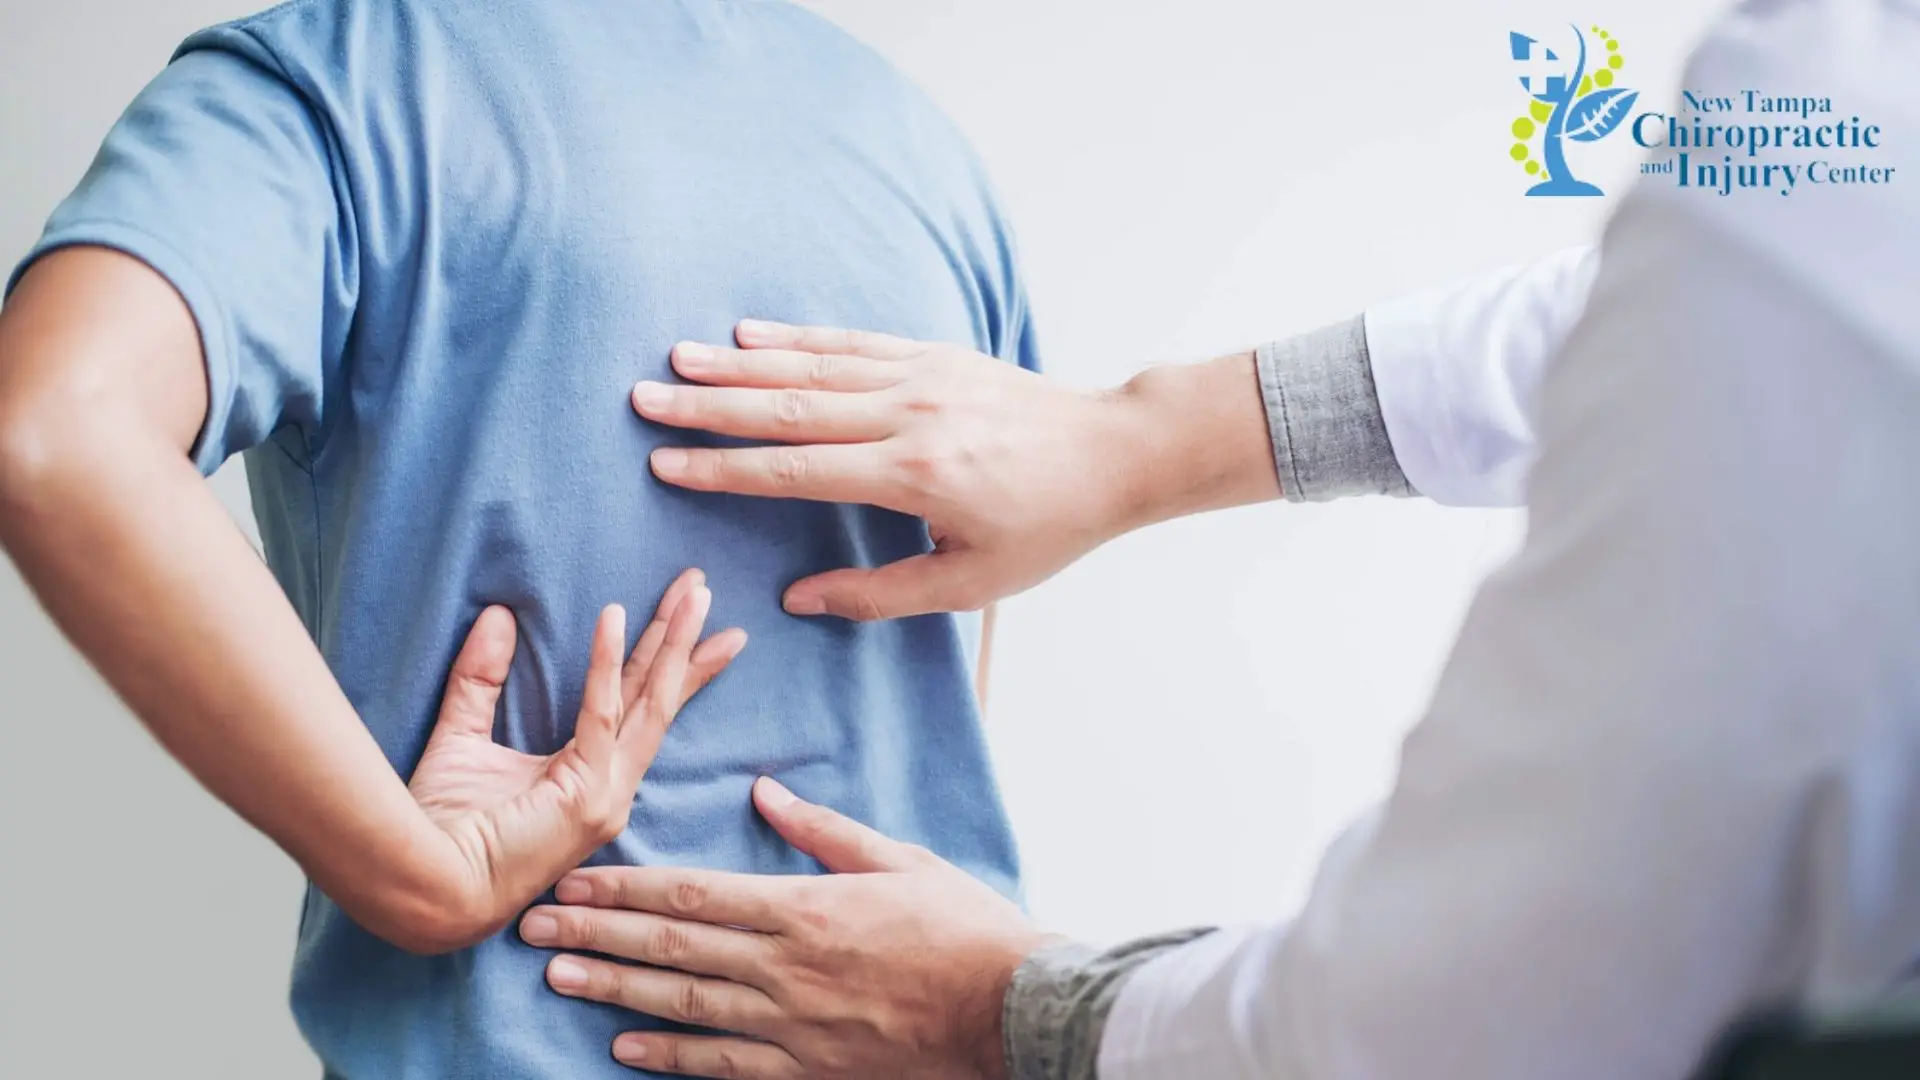 How Can A Chiropractor Help With Back Pain?